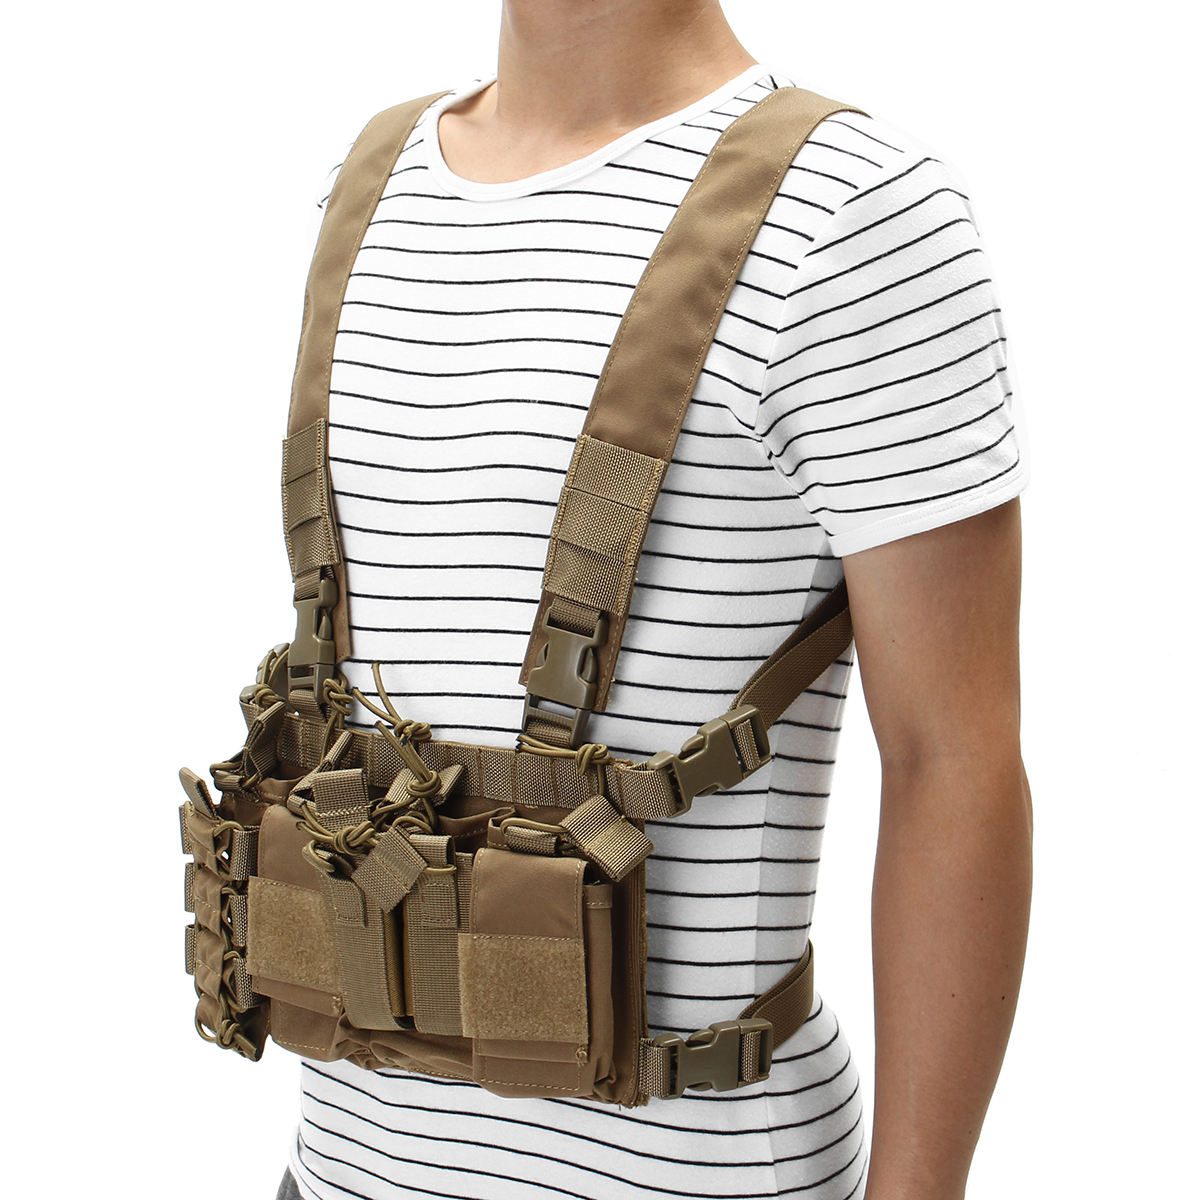 52x65cm-Nylon-Universal-Chest-Rig-Hunting-Vest-with-223308-Pouches-2-Colors-1358349-7